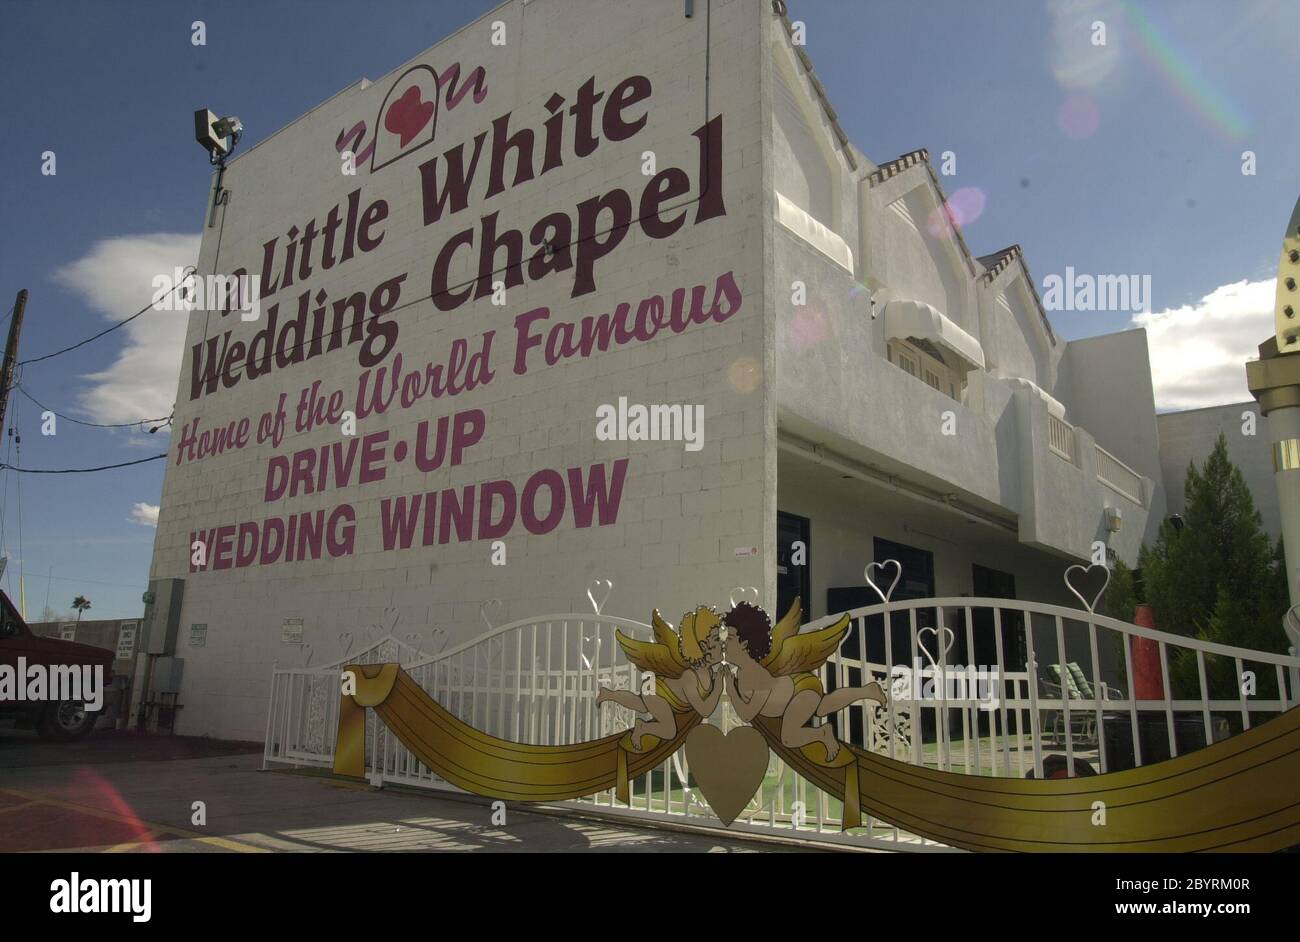 Wedding Chapel Las Vegsa 651 Hotel and most important places in Las Vegas The most beautiful place in Las Vegas Stock Photo